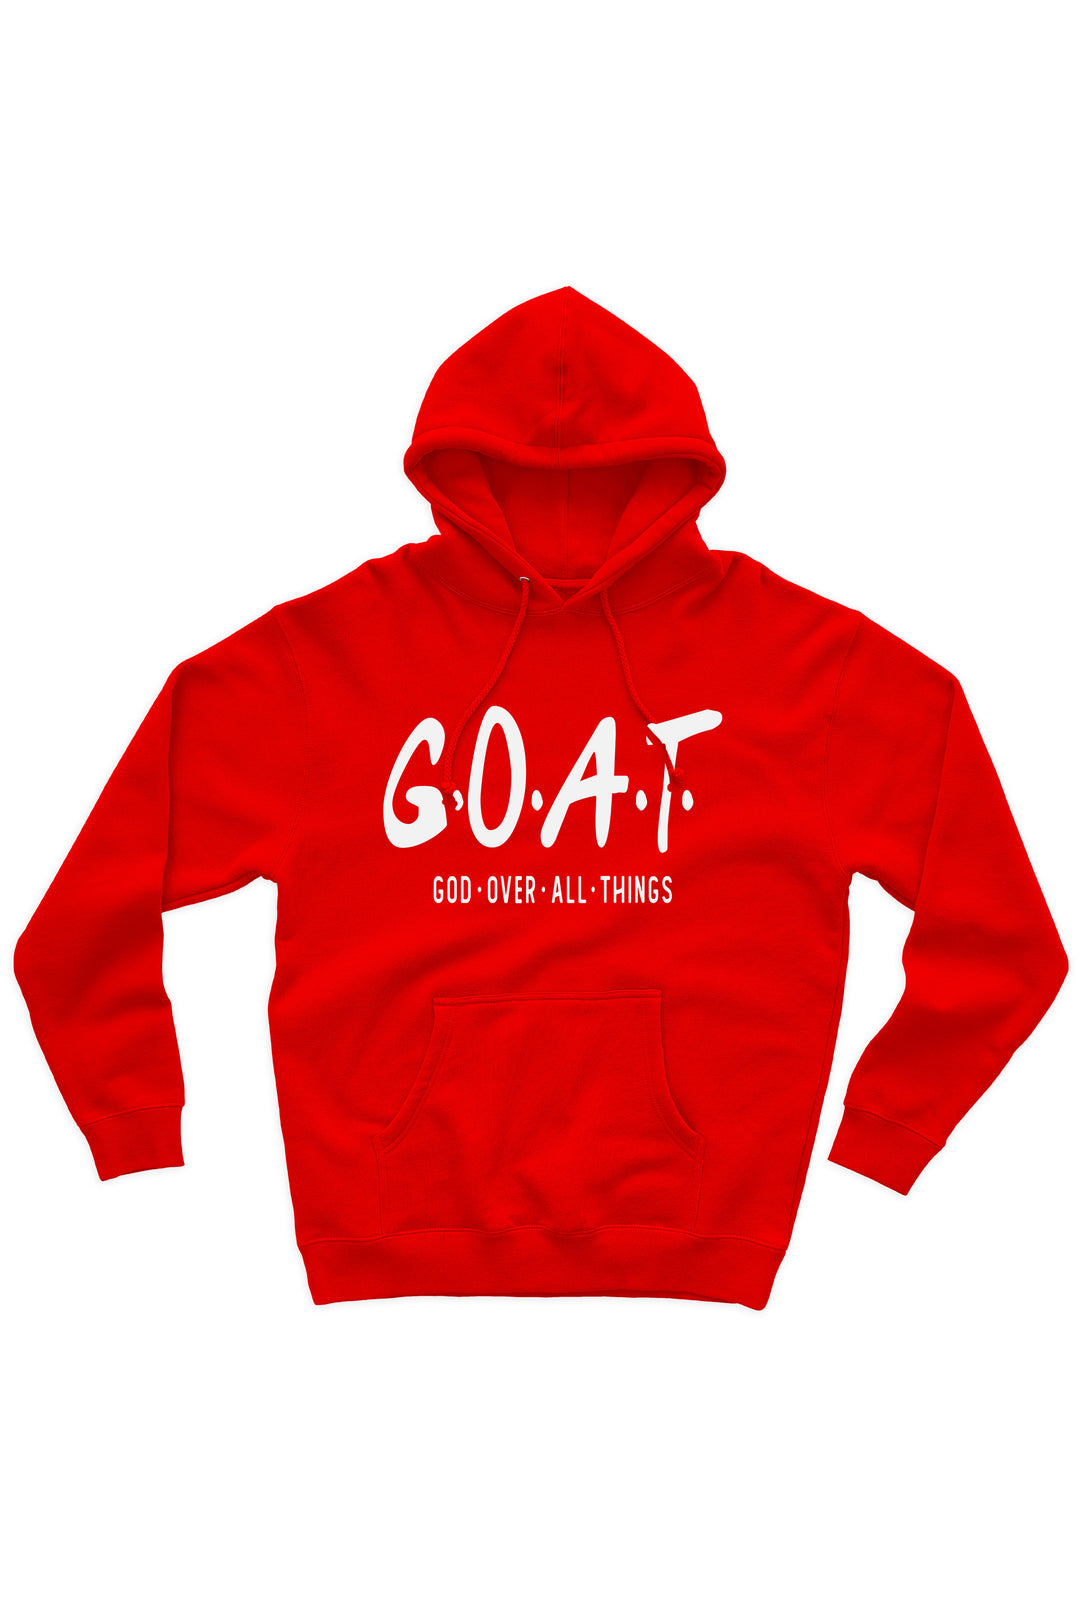 God Over All Things Hoodie (White Logo) - Zamage